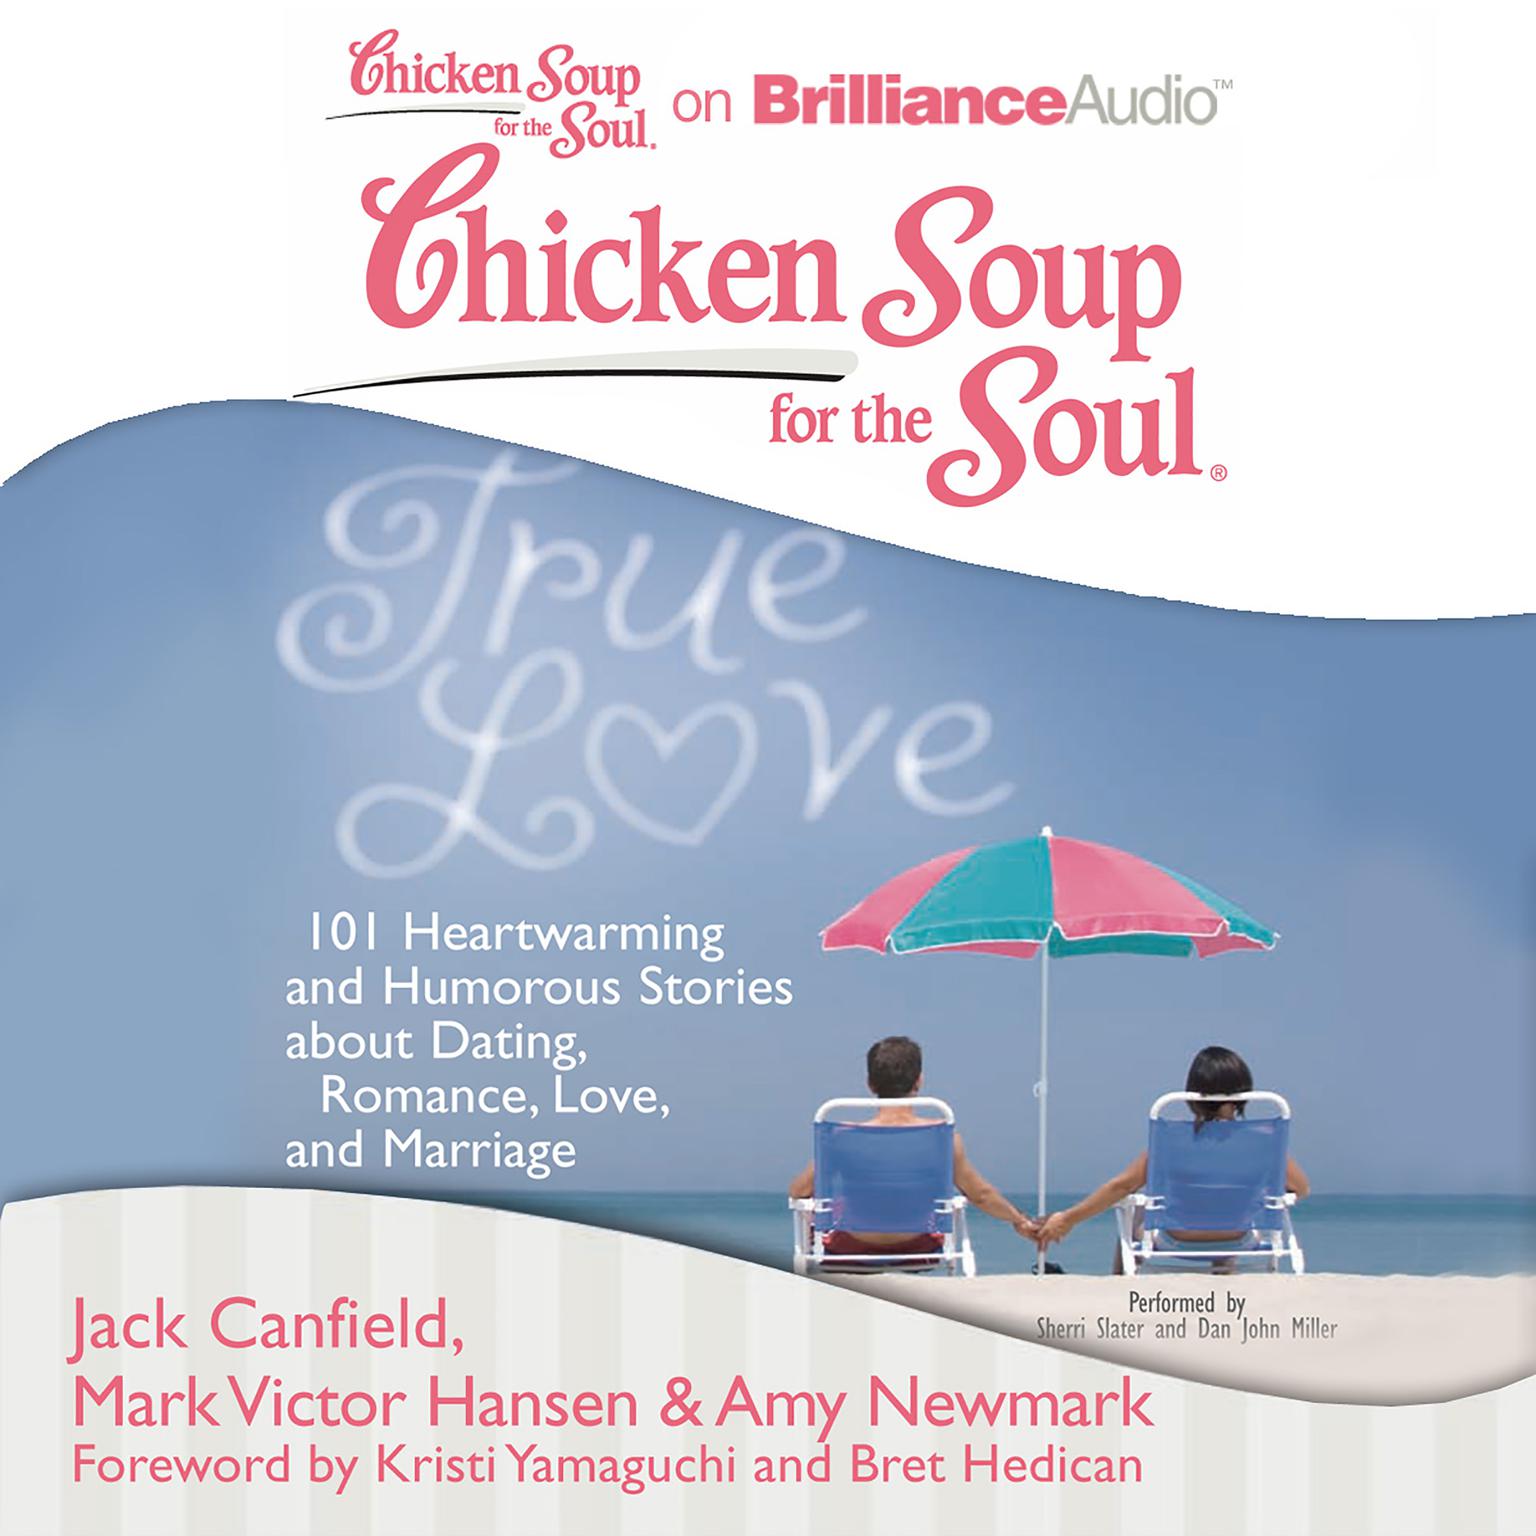 Chicken Soup for the Soul: True Love: 101 Heartwarming and Humorous Stories about Dating, Romance, Love, and Marriage Audiobook, by Jack Canfield